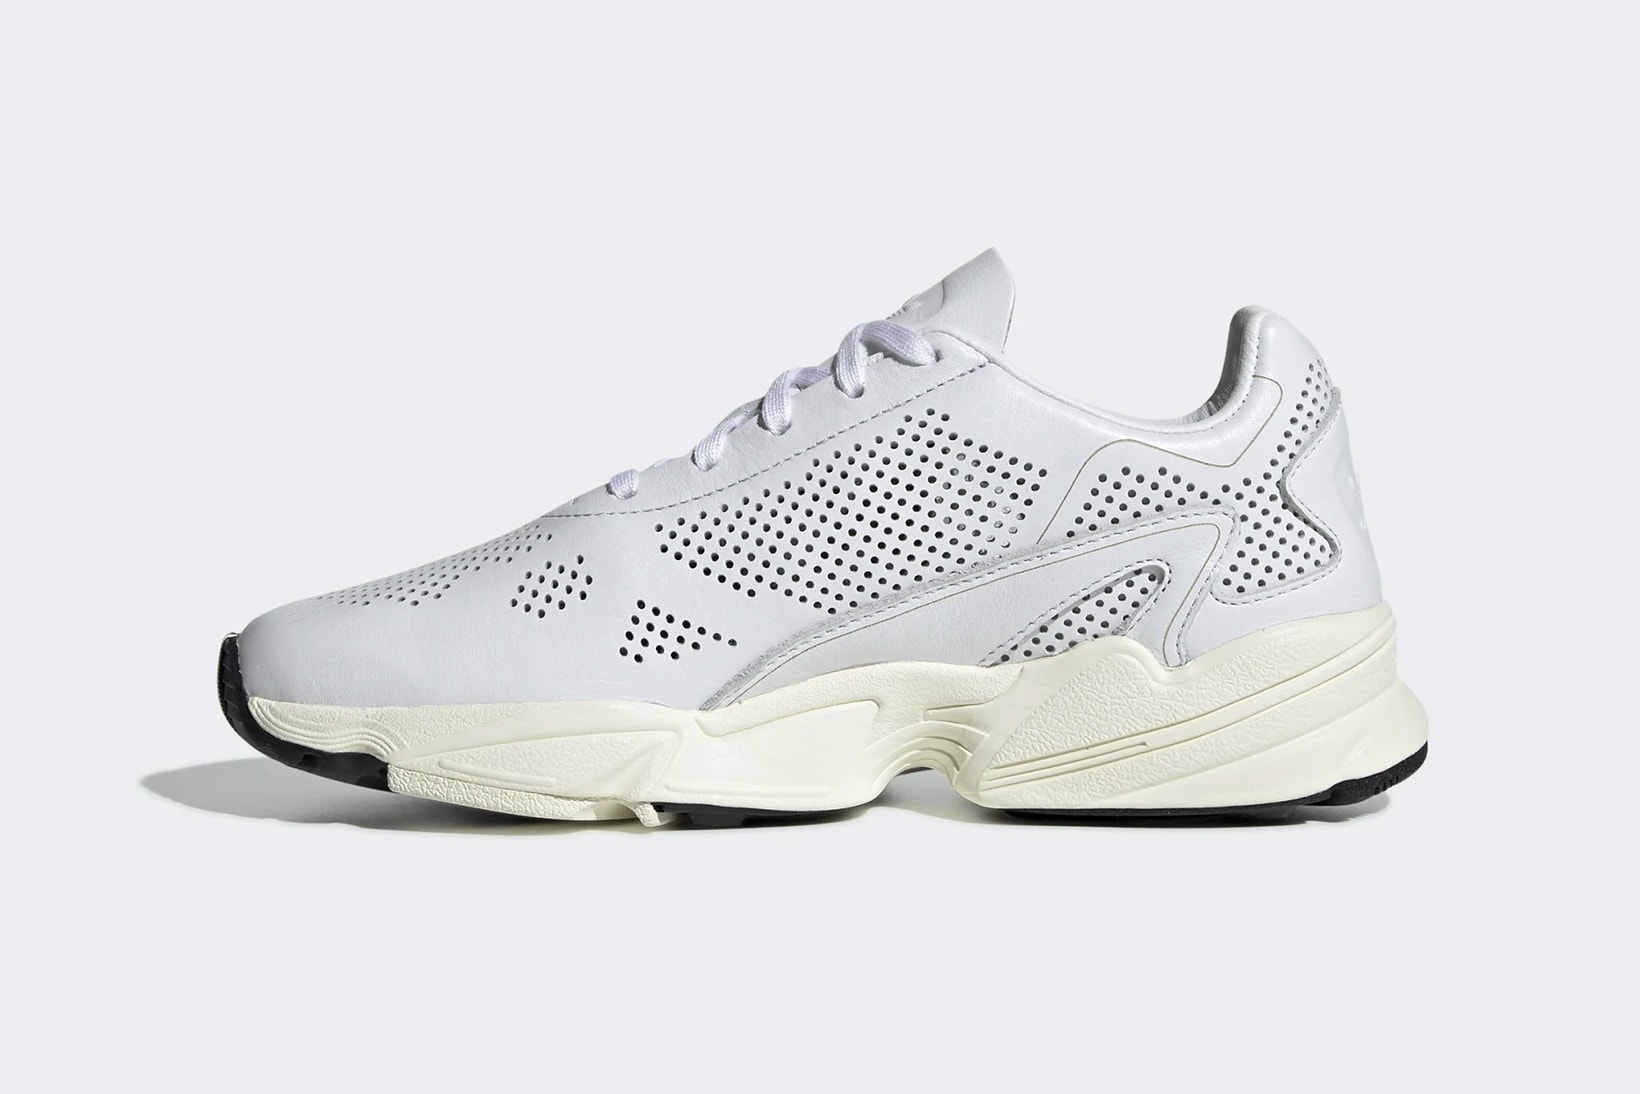 adidas falcon cloud white perforated upper details leather breathable sneaker spring